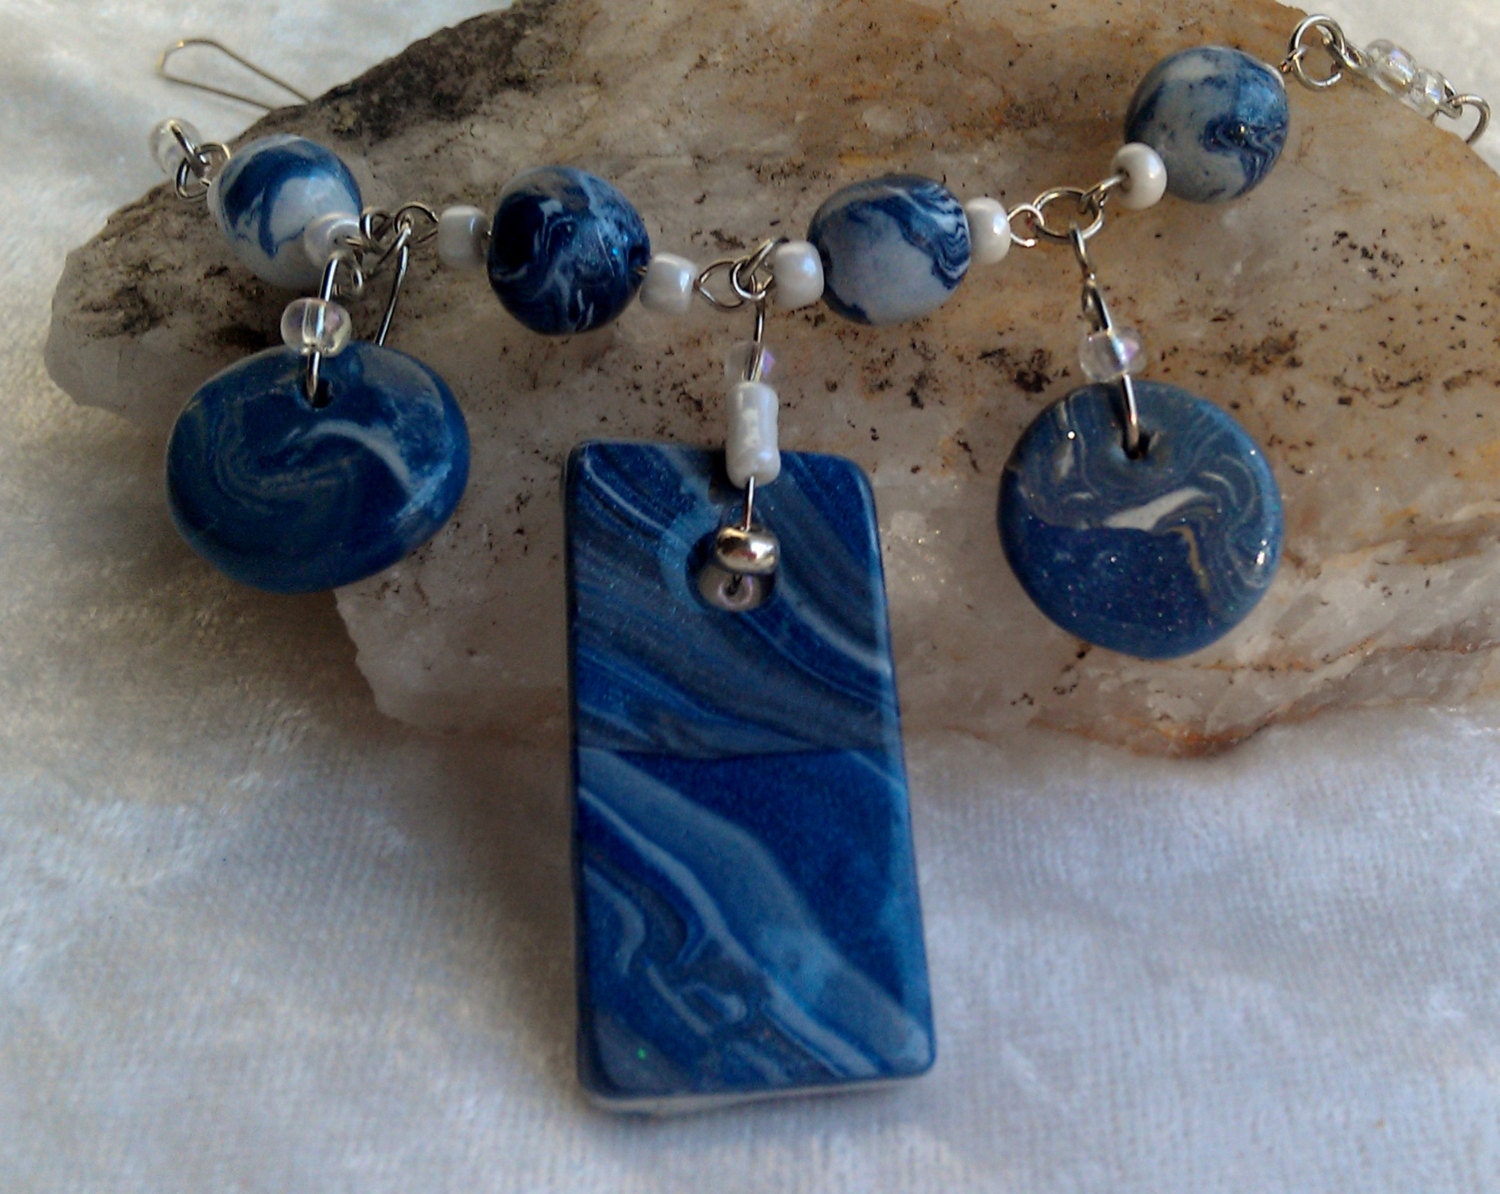 Blue and gray swirl handmade necklace - fancyleafdesigns